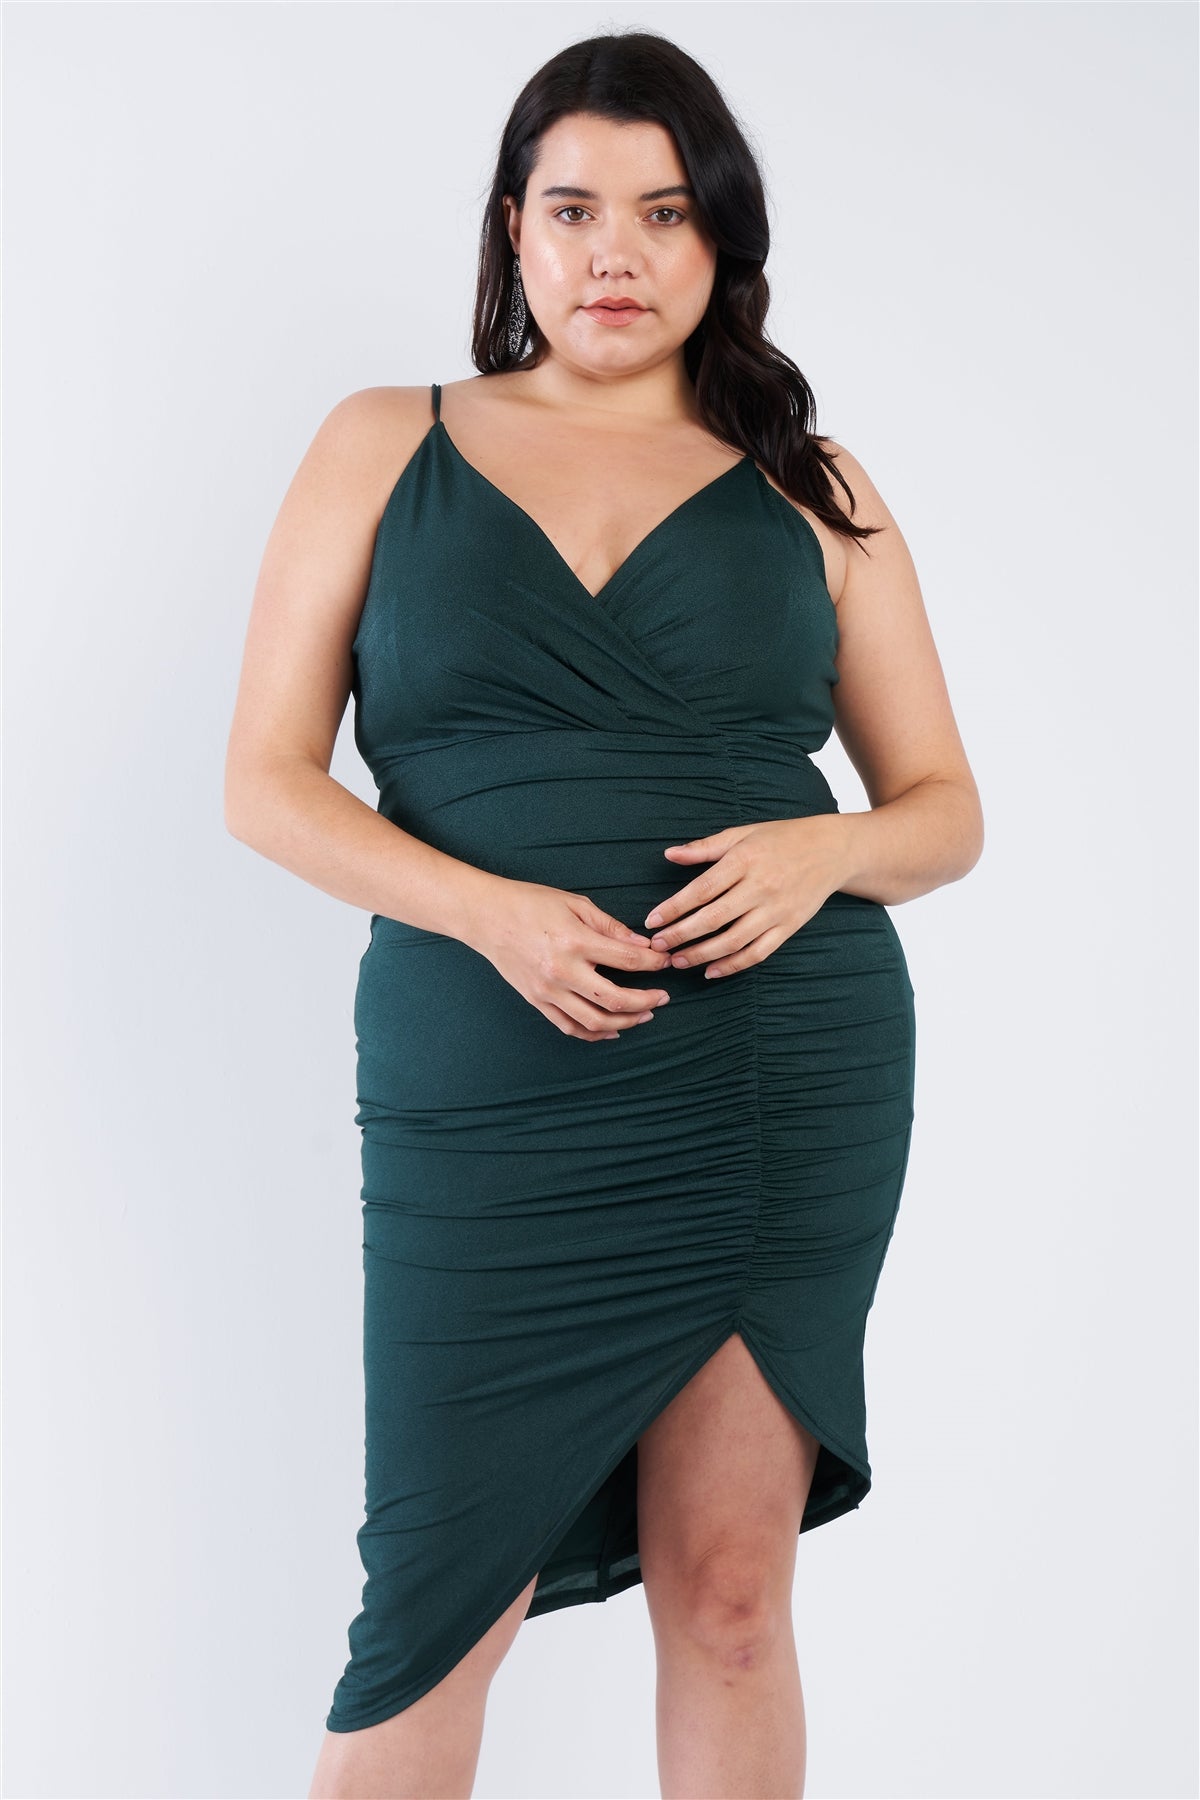 Plus Size Lovely Ladies Polyester Blend A-symmetrical Wrap Top Scrunched Seam Club Wear Dress (Hunter Green)